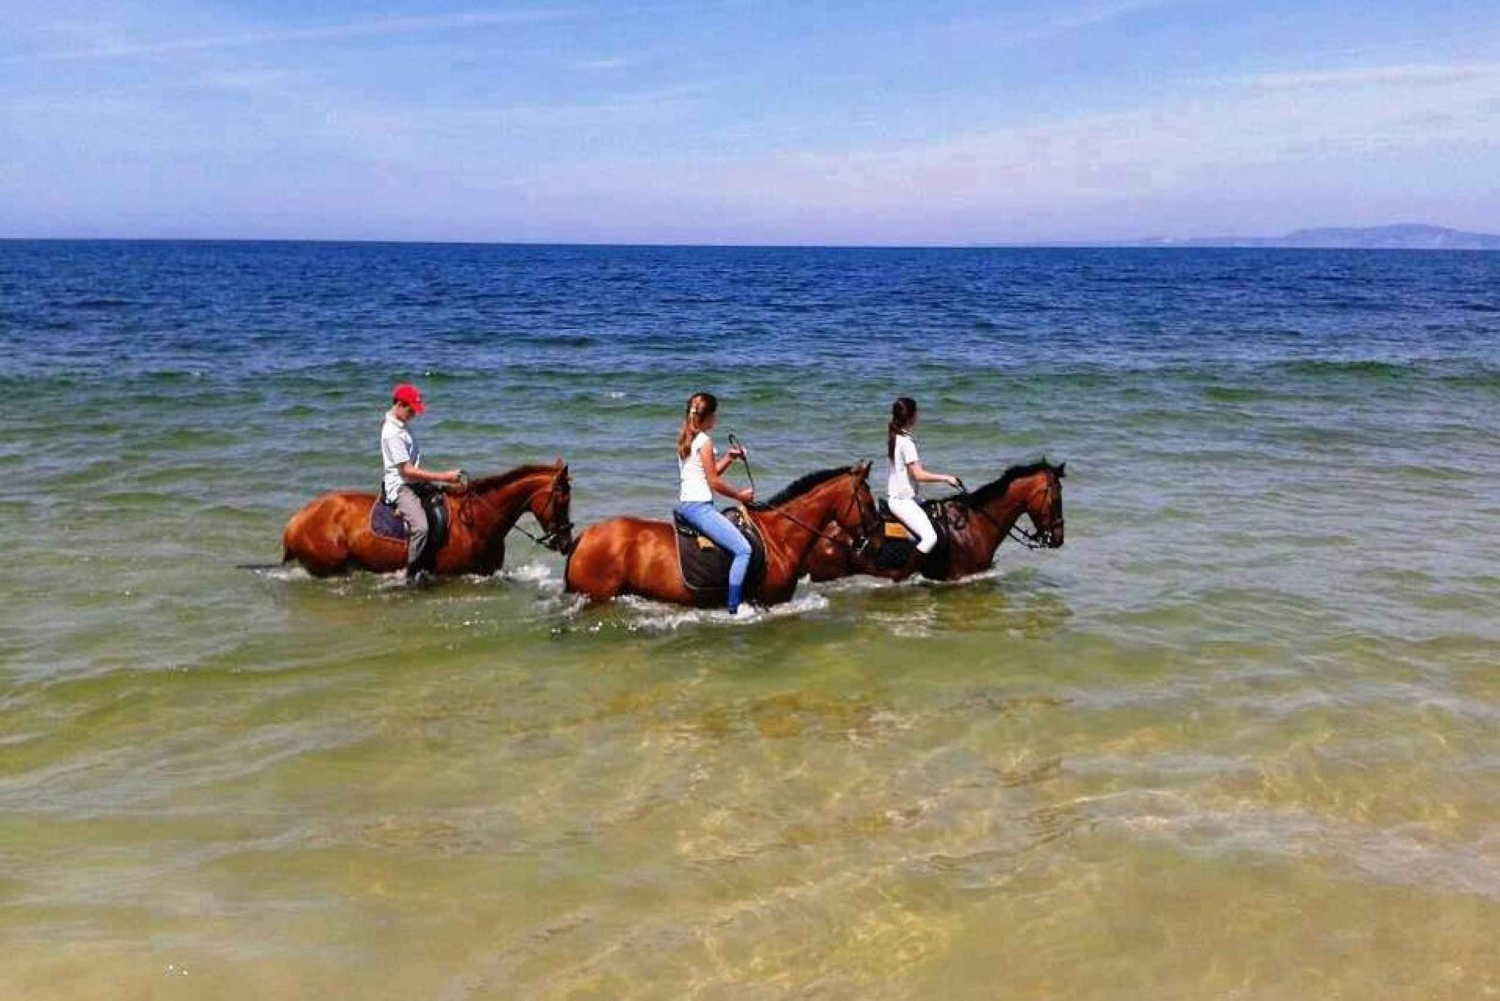 Horse riding on the beach with private transfer from Lisbon